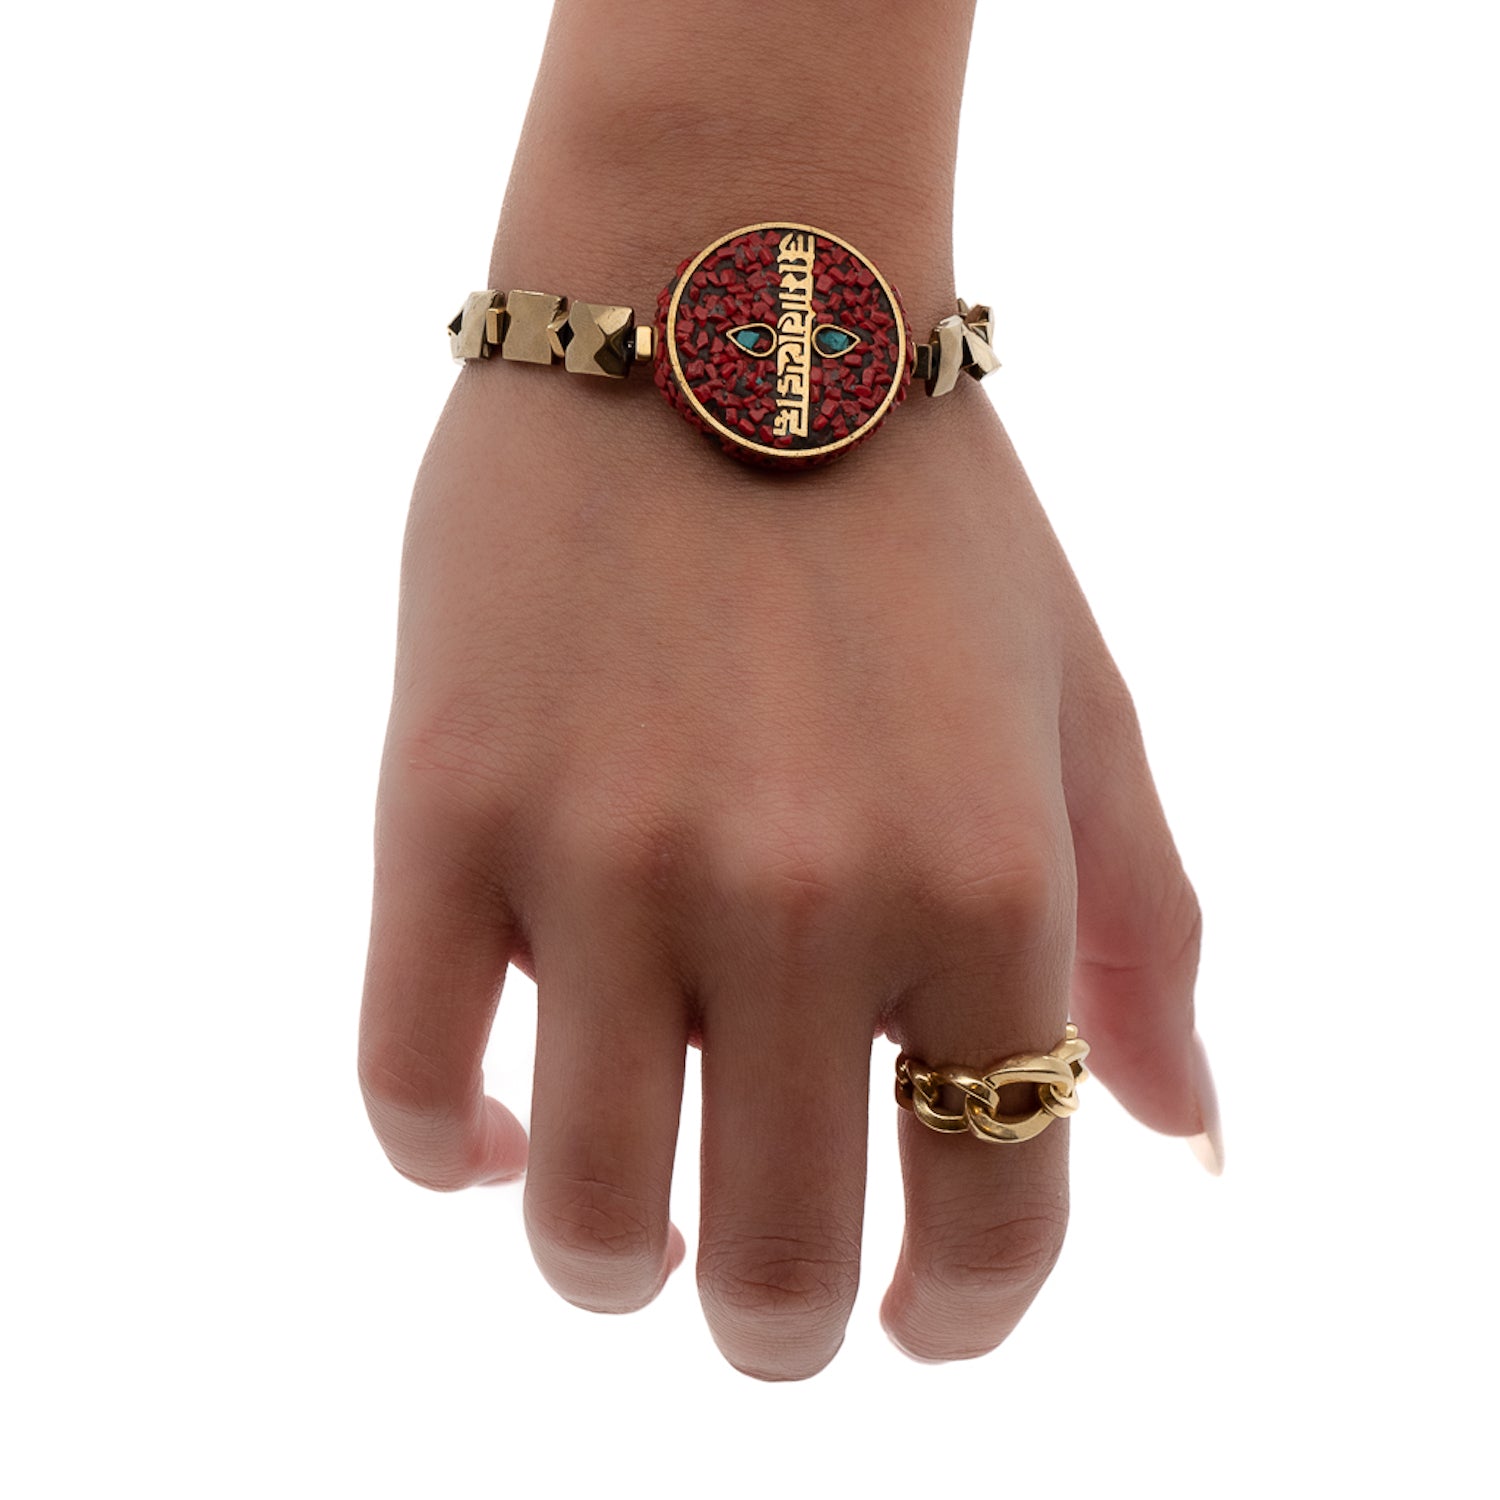 See the Om Mani Padme Hum Coral Mantra Bracelet on the hand model&#39;s wrist, radiating spiritual energy and protection.